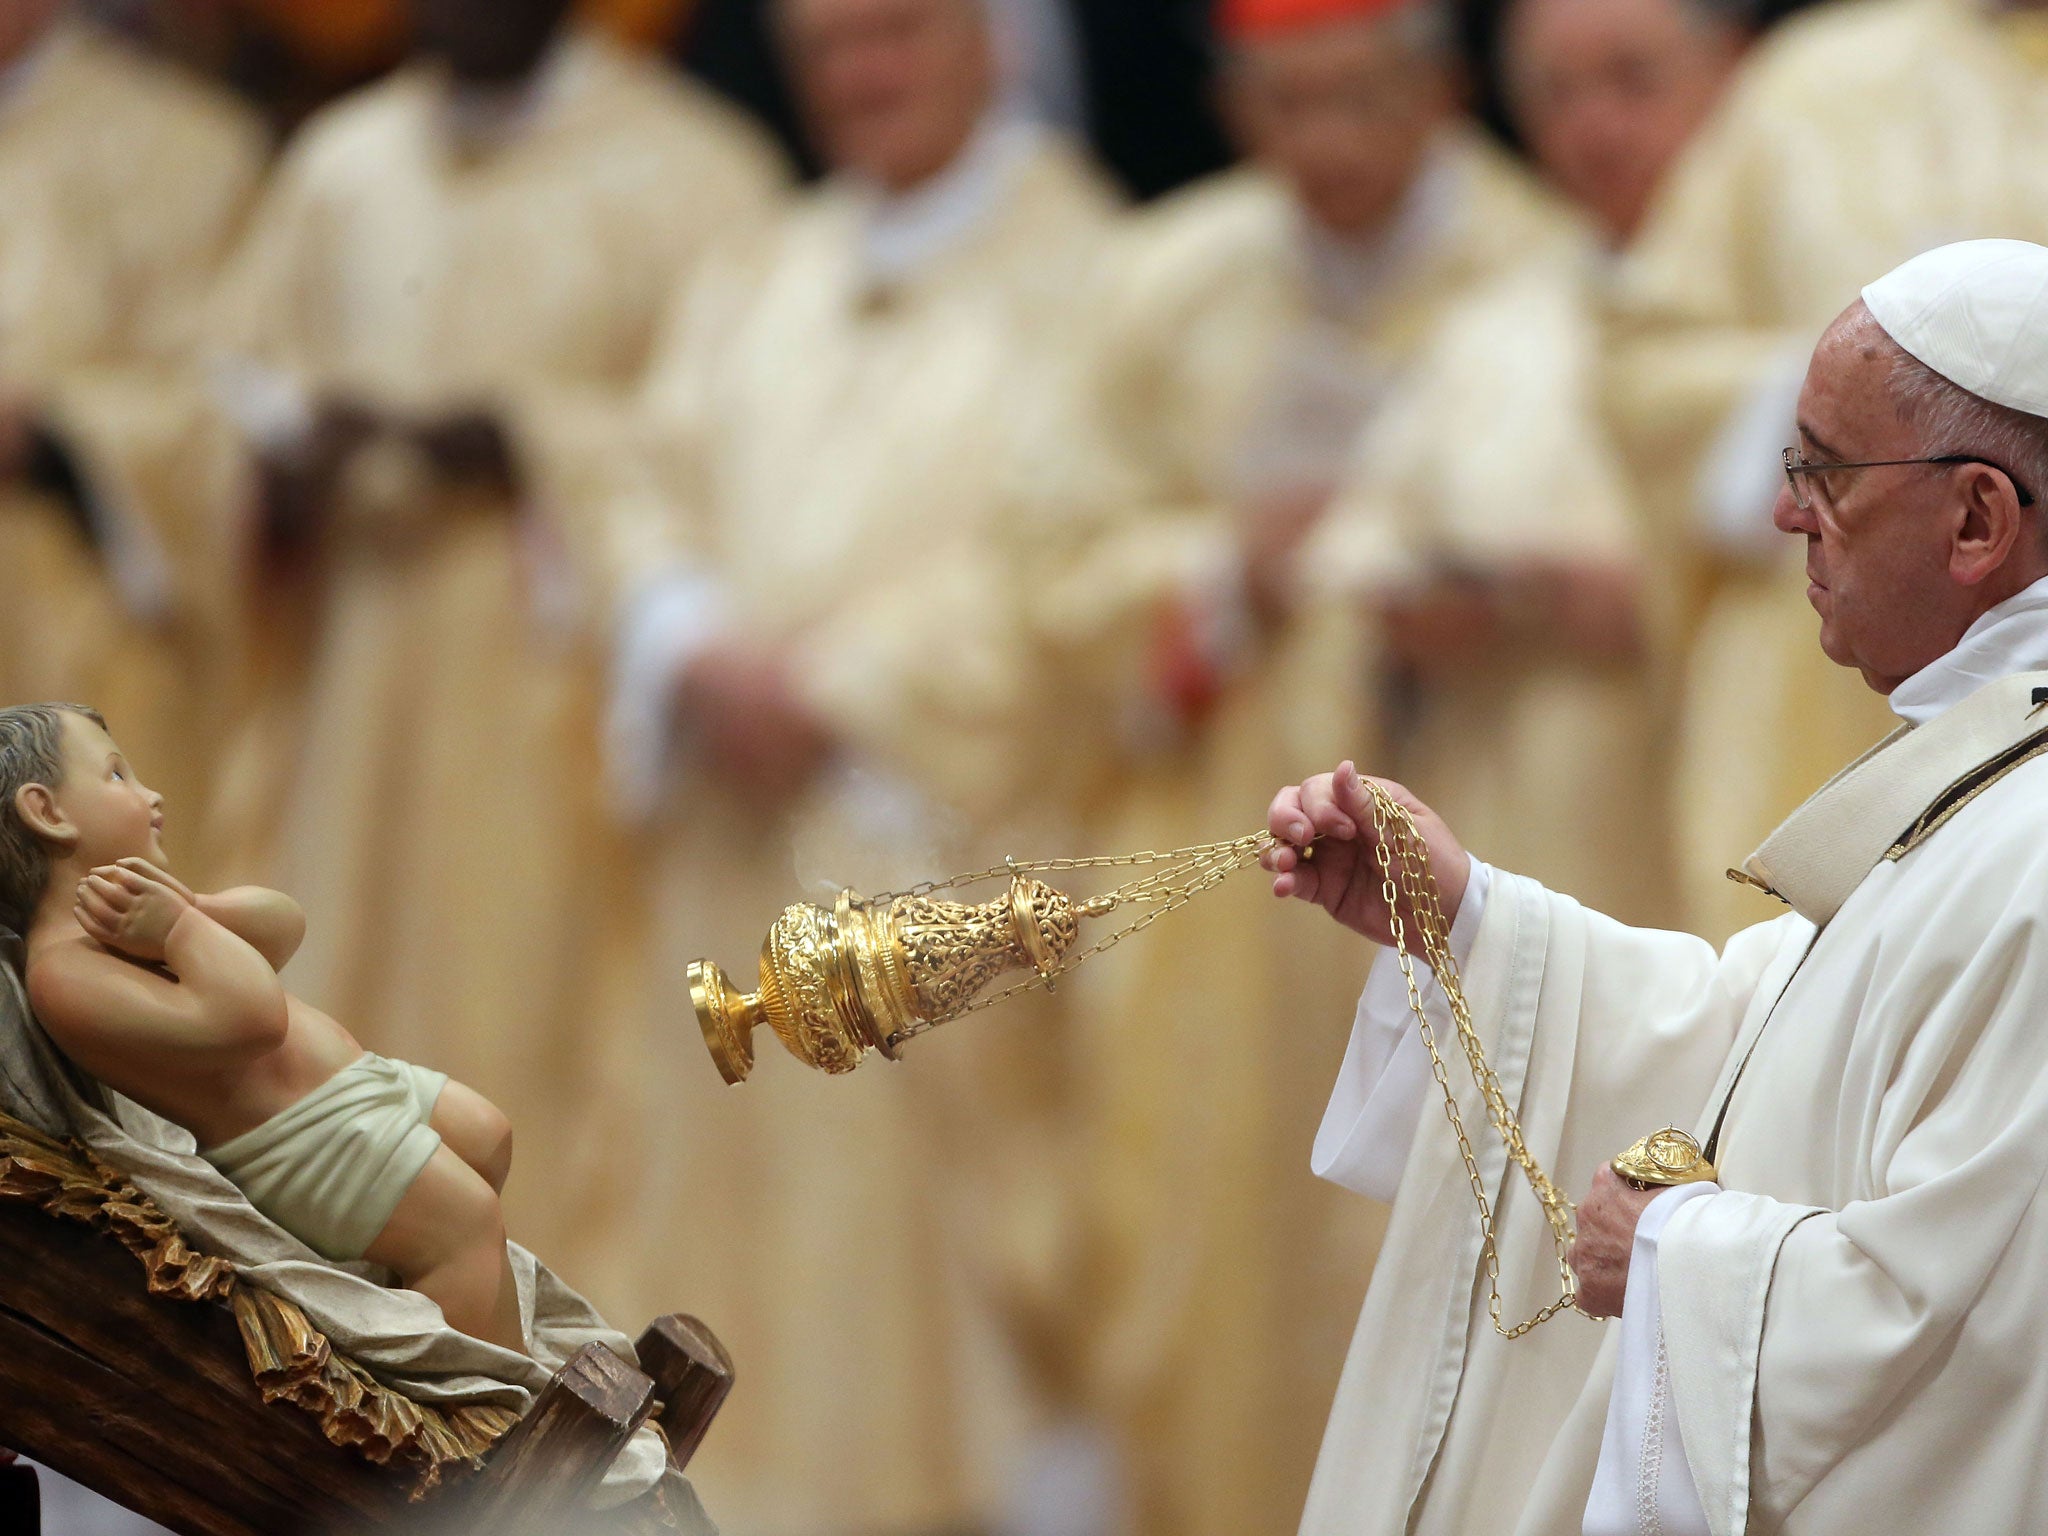 Pope Francis kisses incense the unveiled baby Jesus during a Christmas Eve mass at St Peter's Basilica to mark the nativity of Jesus Christ, on 24 December, 2014